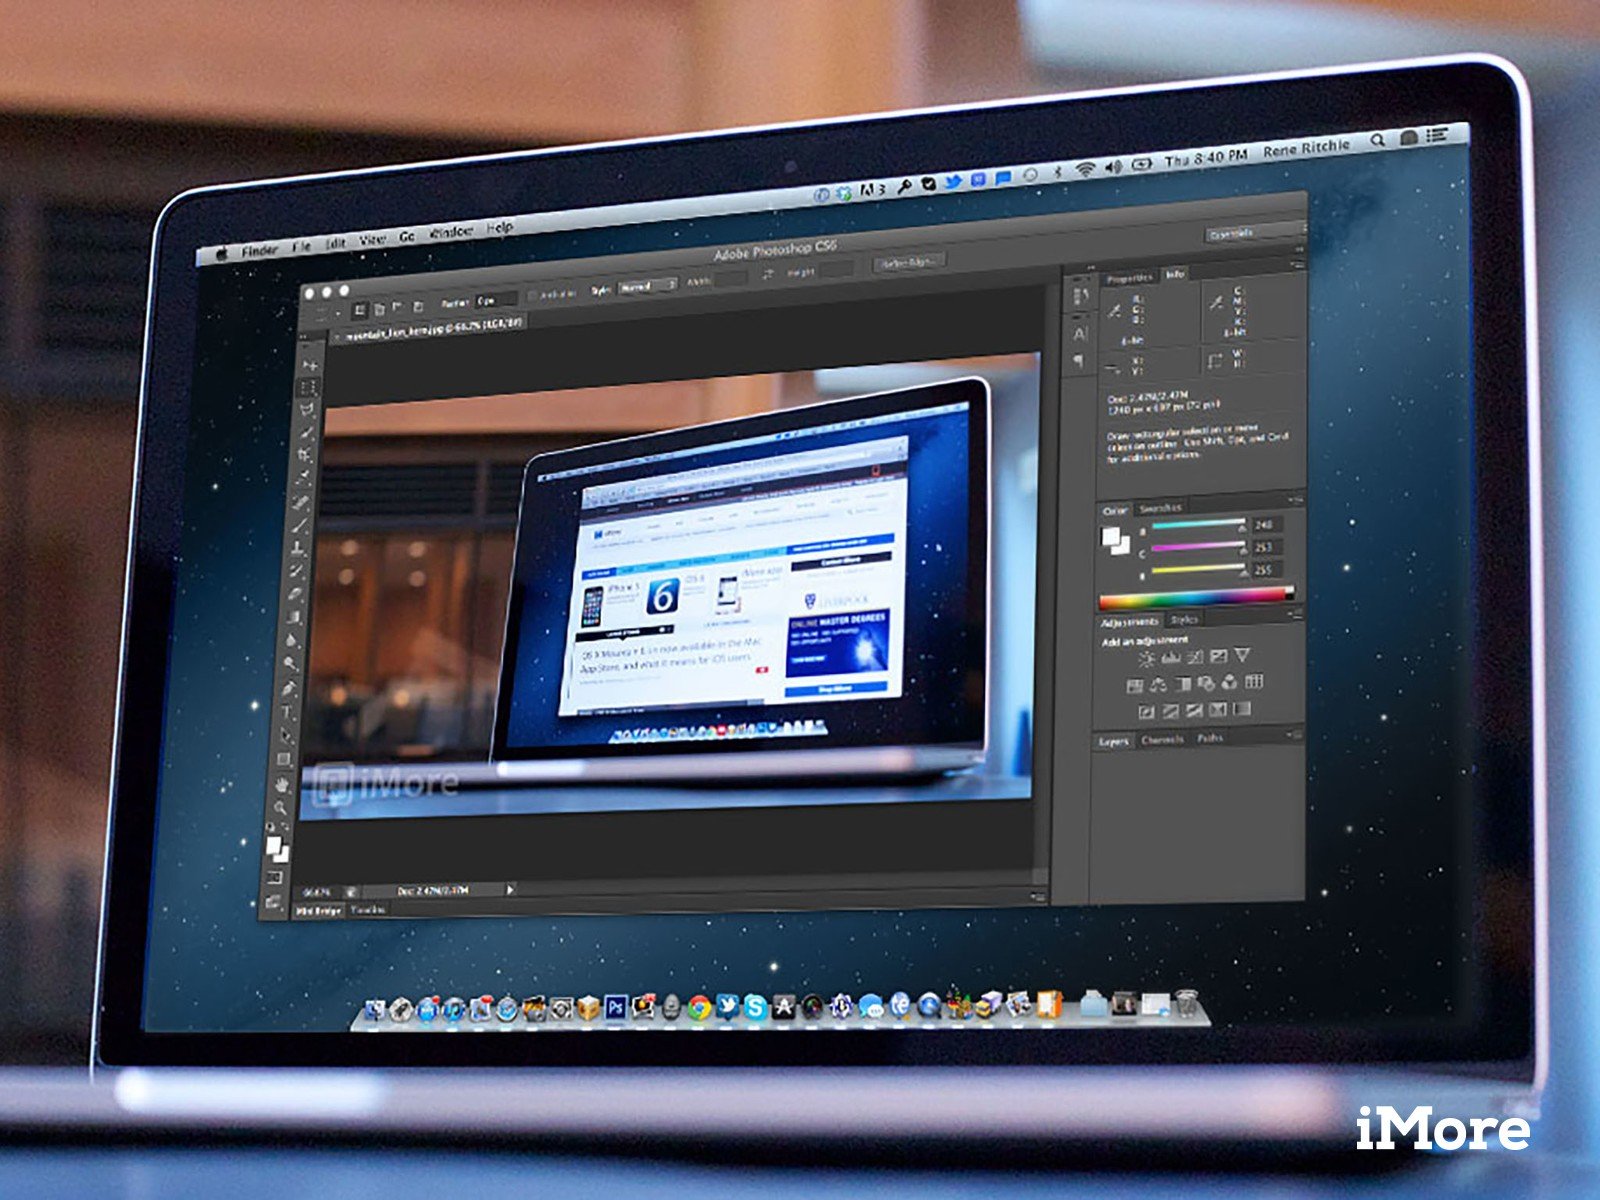 Photoshop express for macbook pro